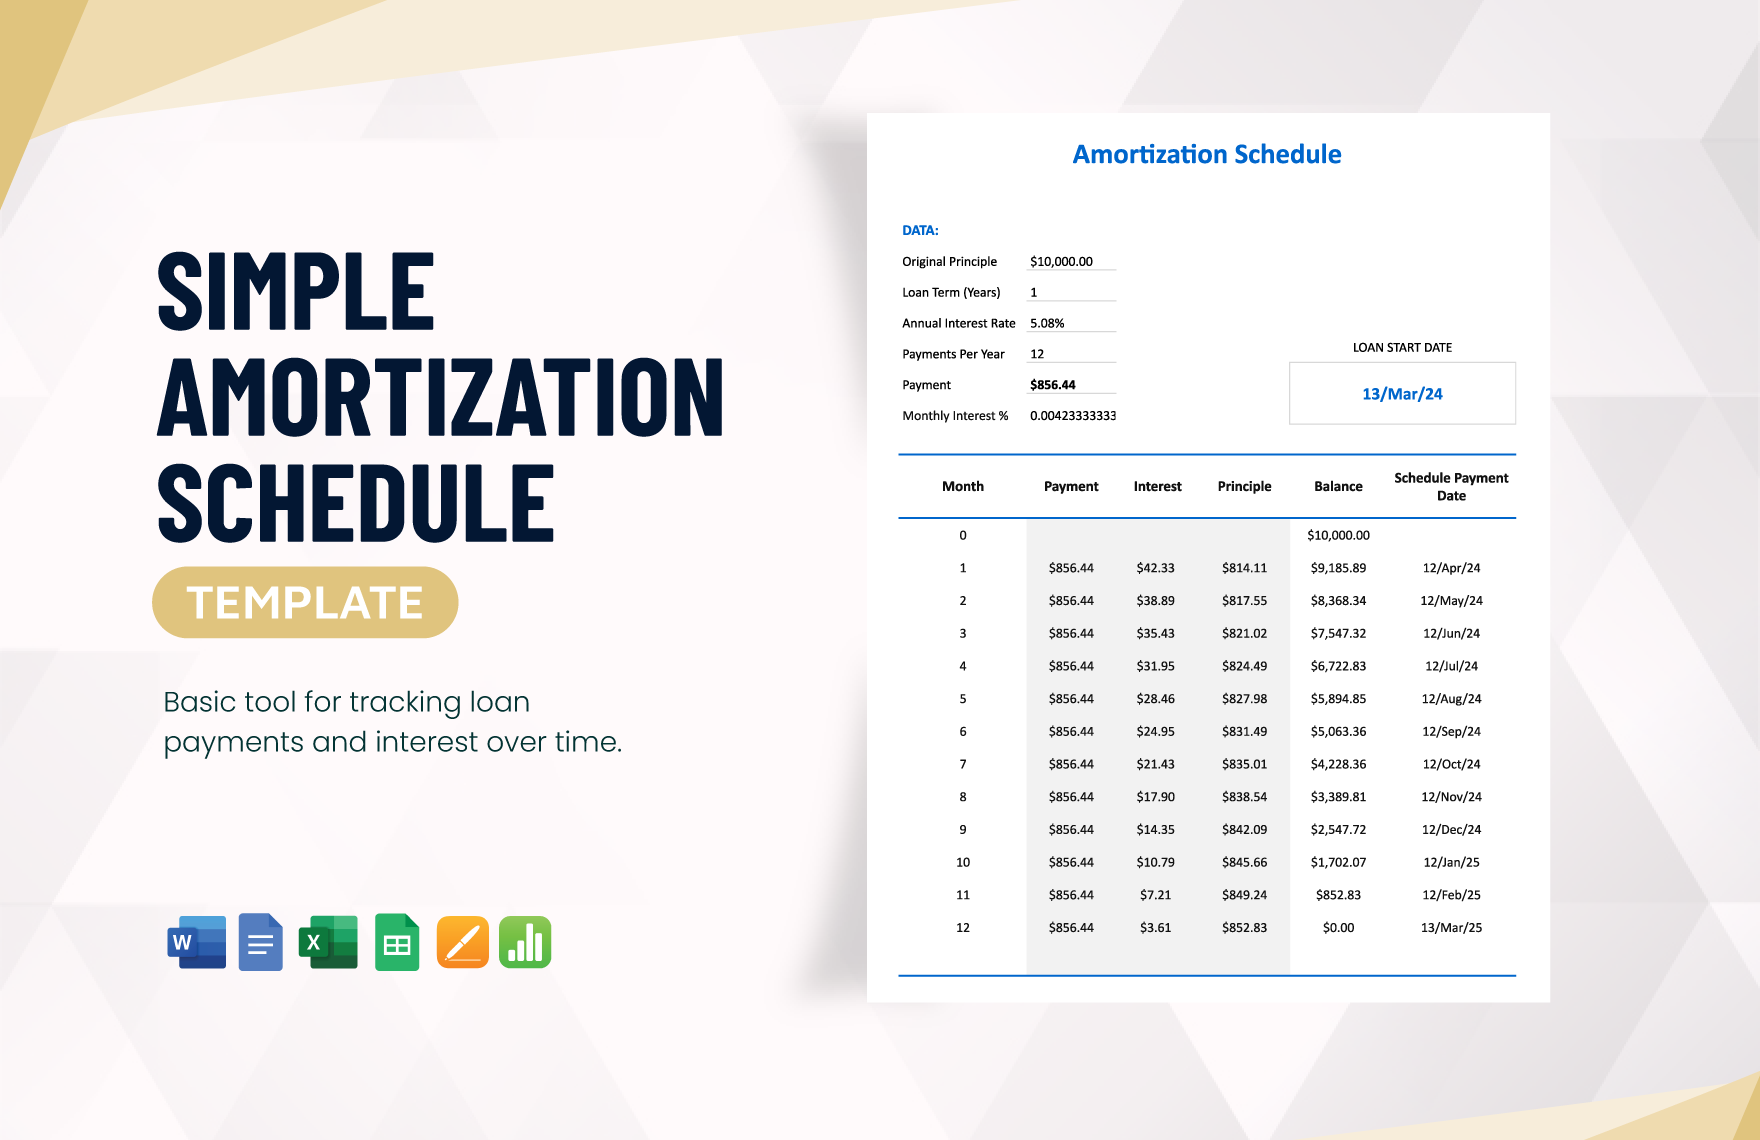 Simple Amortization Schedule Template in Word, Google Docs, Excel, Google Sheets, Apple Pages, Apple Numbers